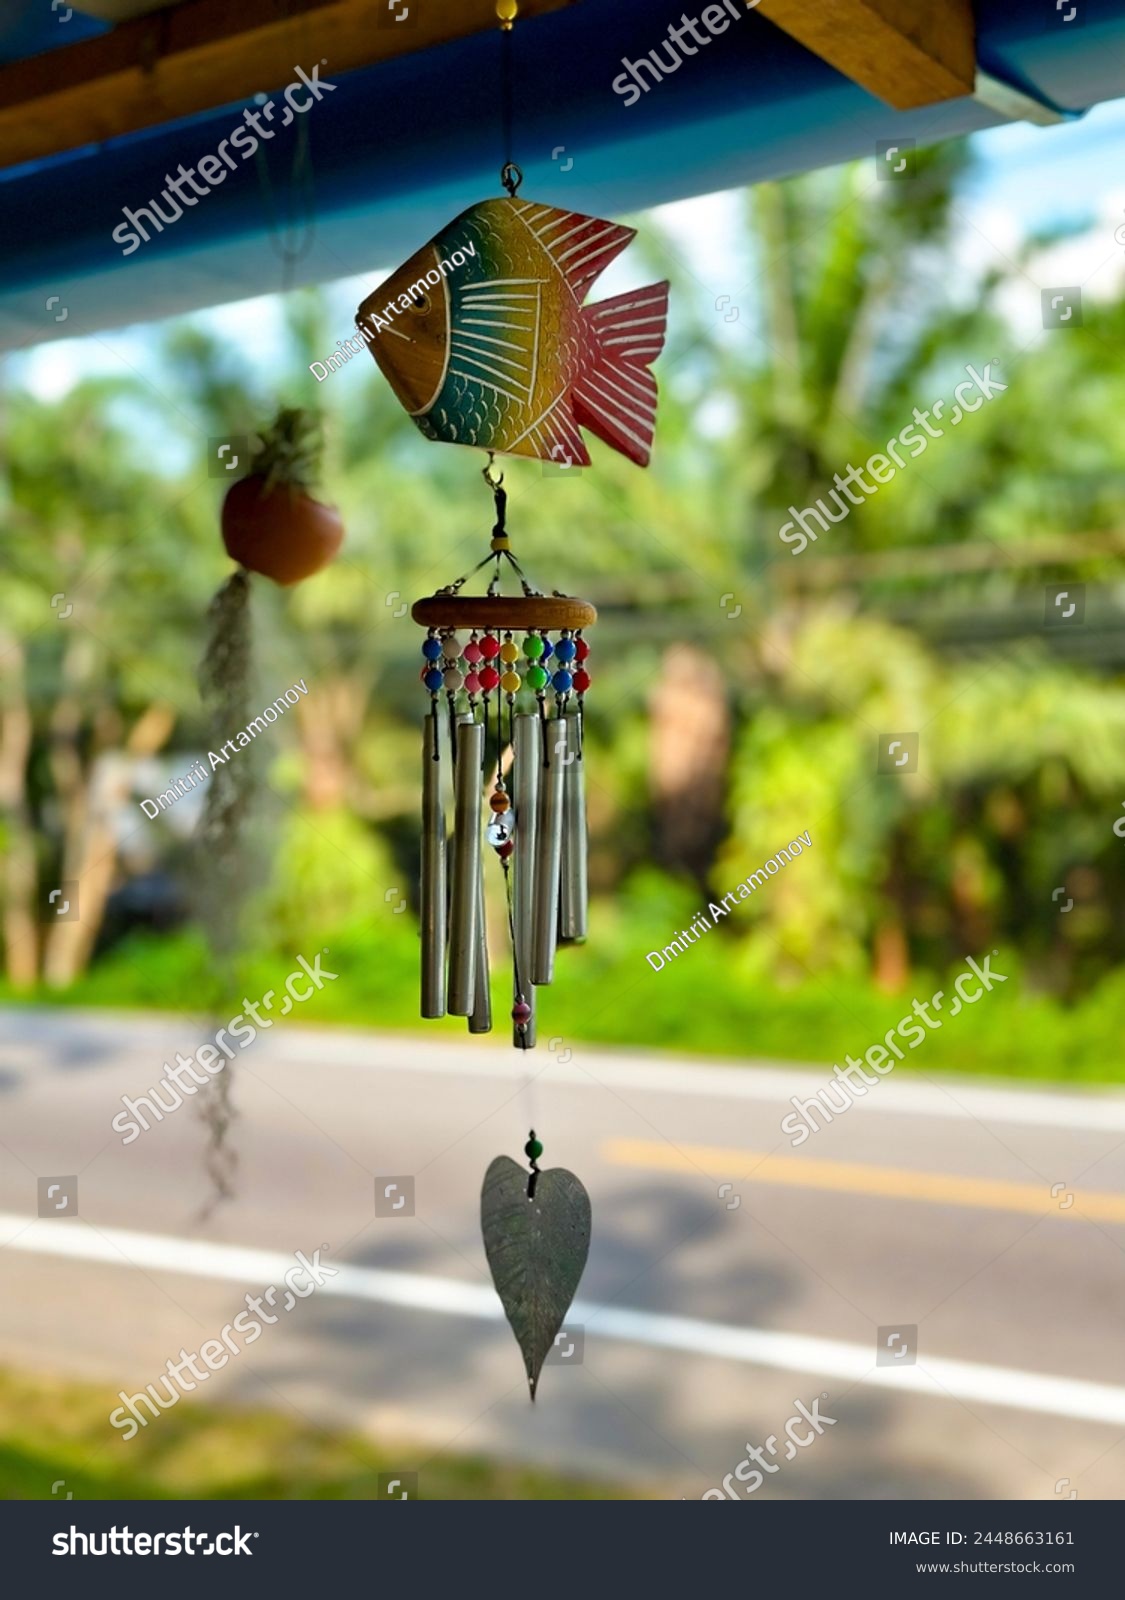 A hand-painted fish wind chime with metal tubes and beads hanging outdoors, a whimsical addition to garden decor #2448663161